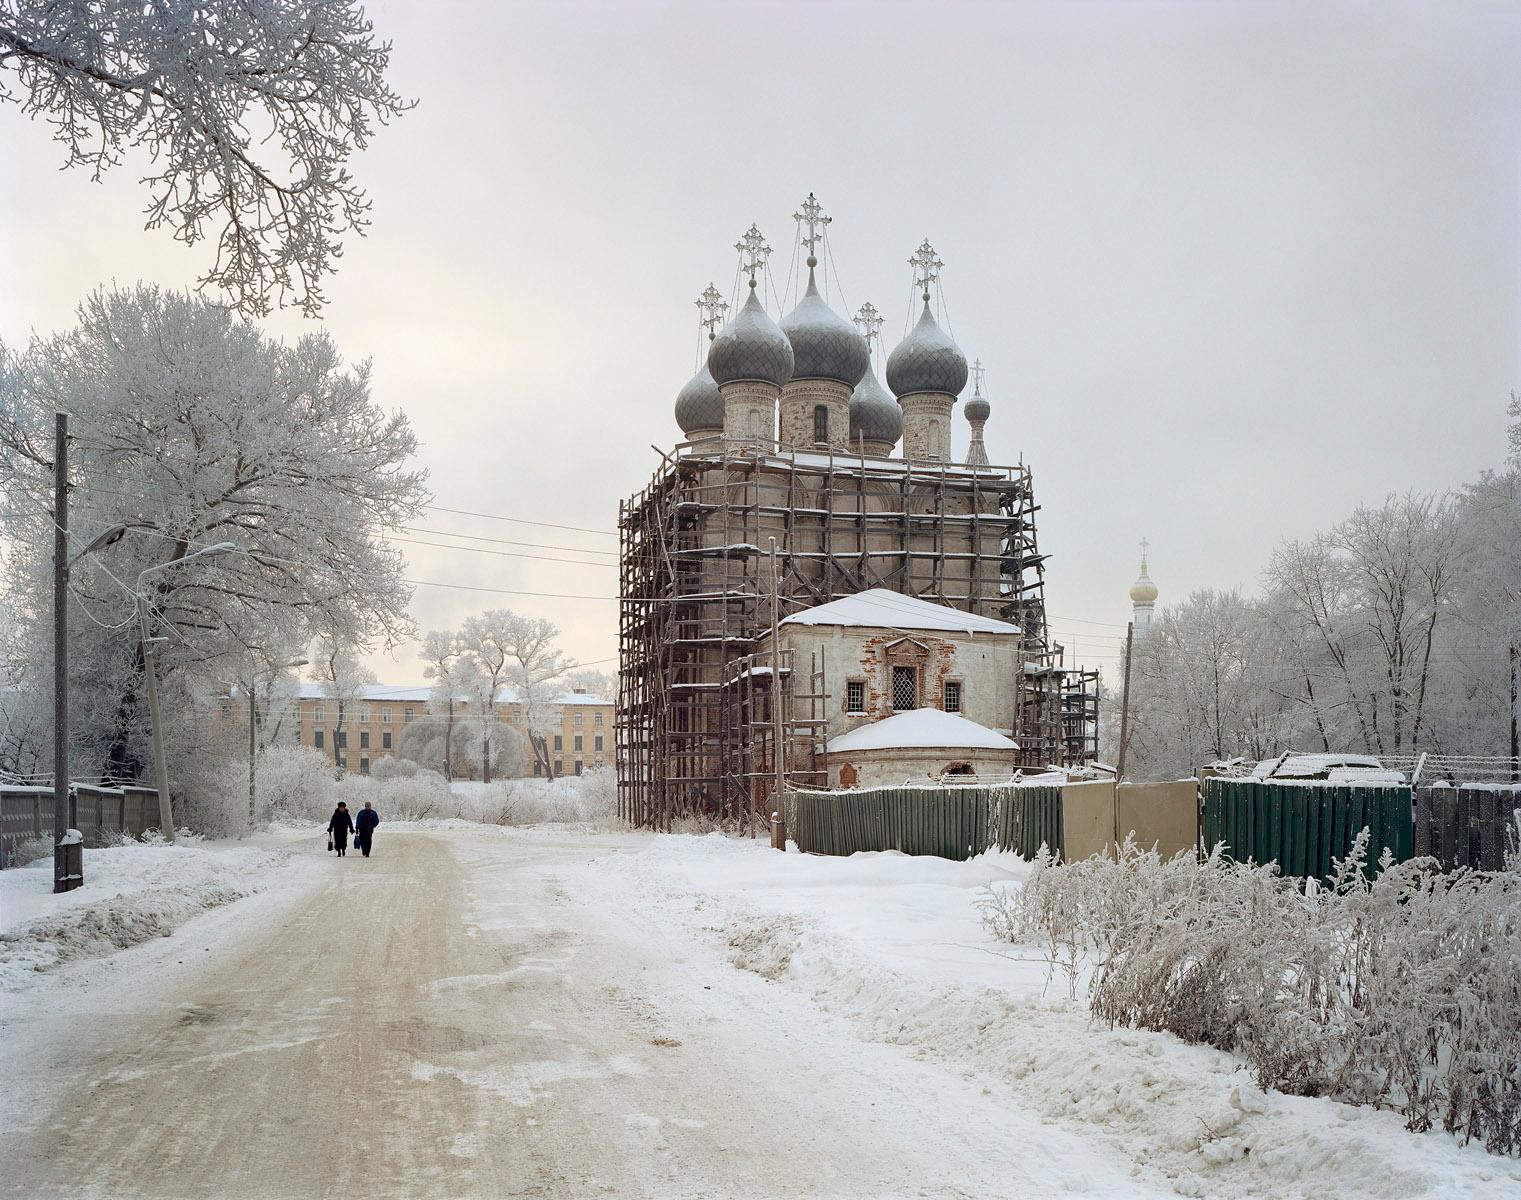 Archival Pigment Print

Vologda Russia

All available sizes & editions for each size of this photograph:
30" x 40” - Edition of 5 + 2 Artist Proofs
40" X 50"- Edition of 5 + 2 Artist Proofs
50" X 60"-  Edition of 5 + 2 Artist Proofs


This